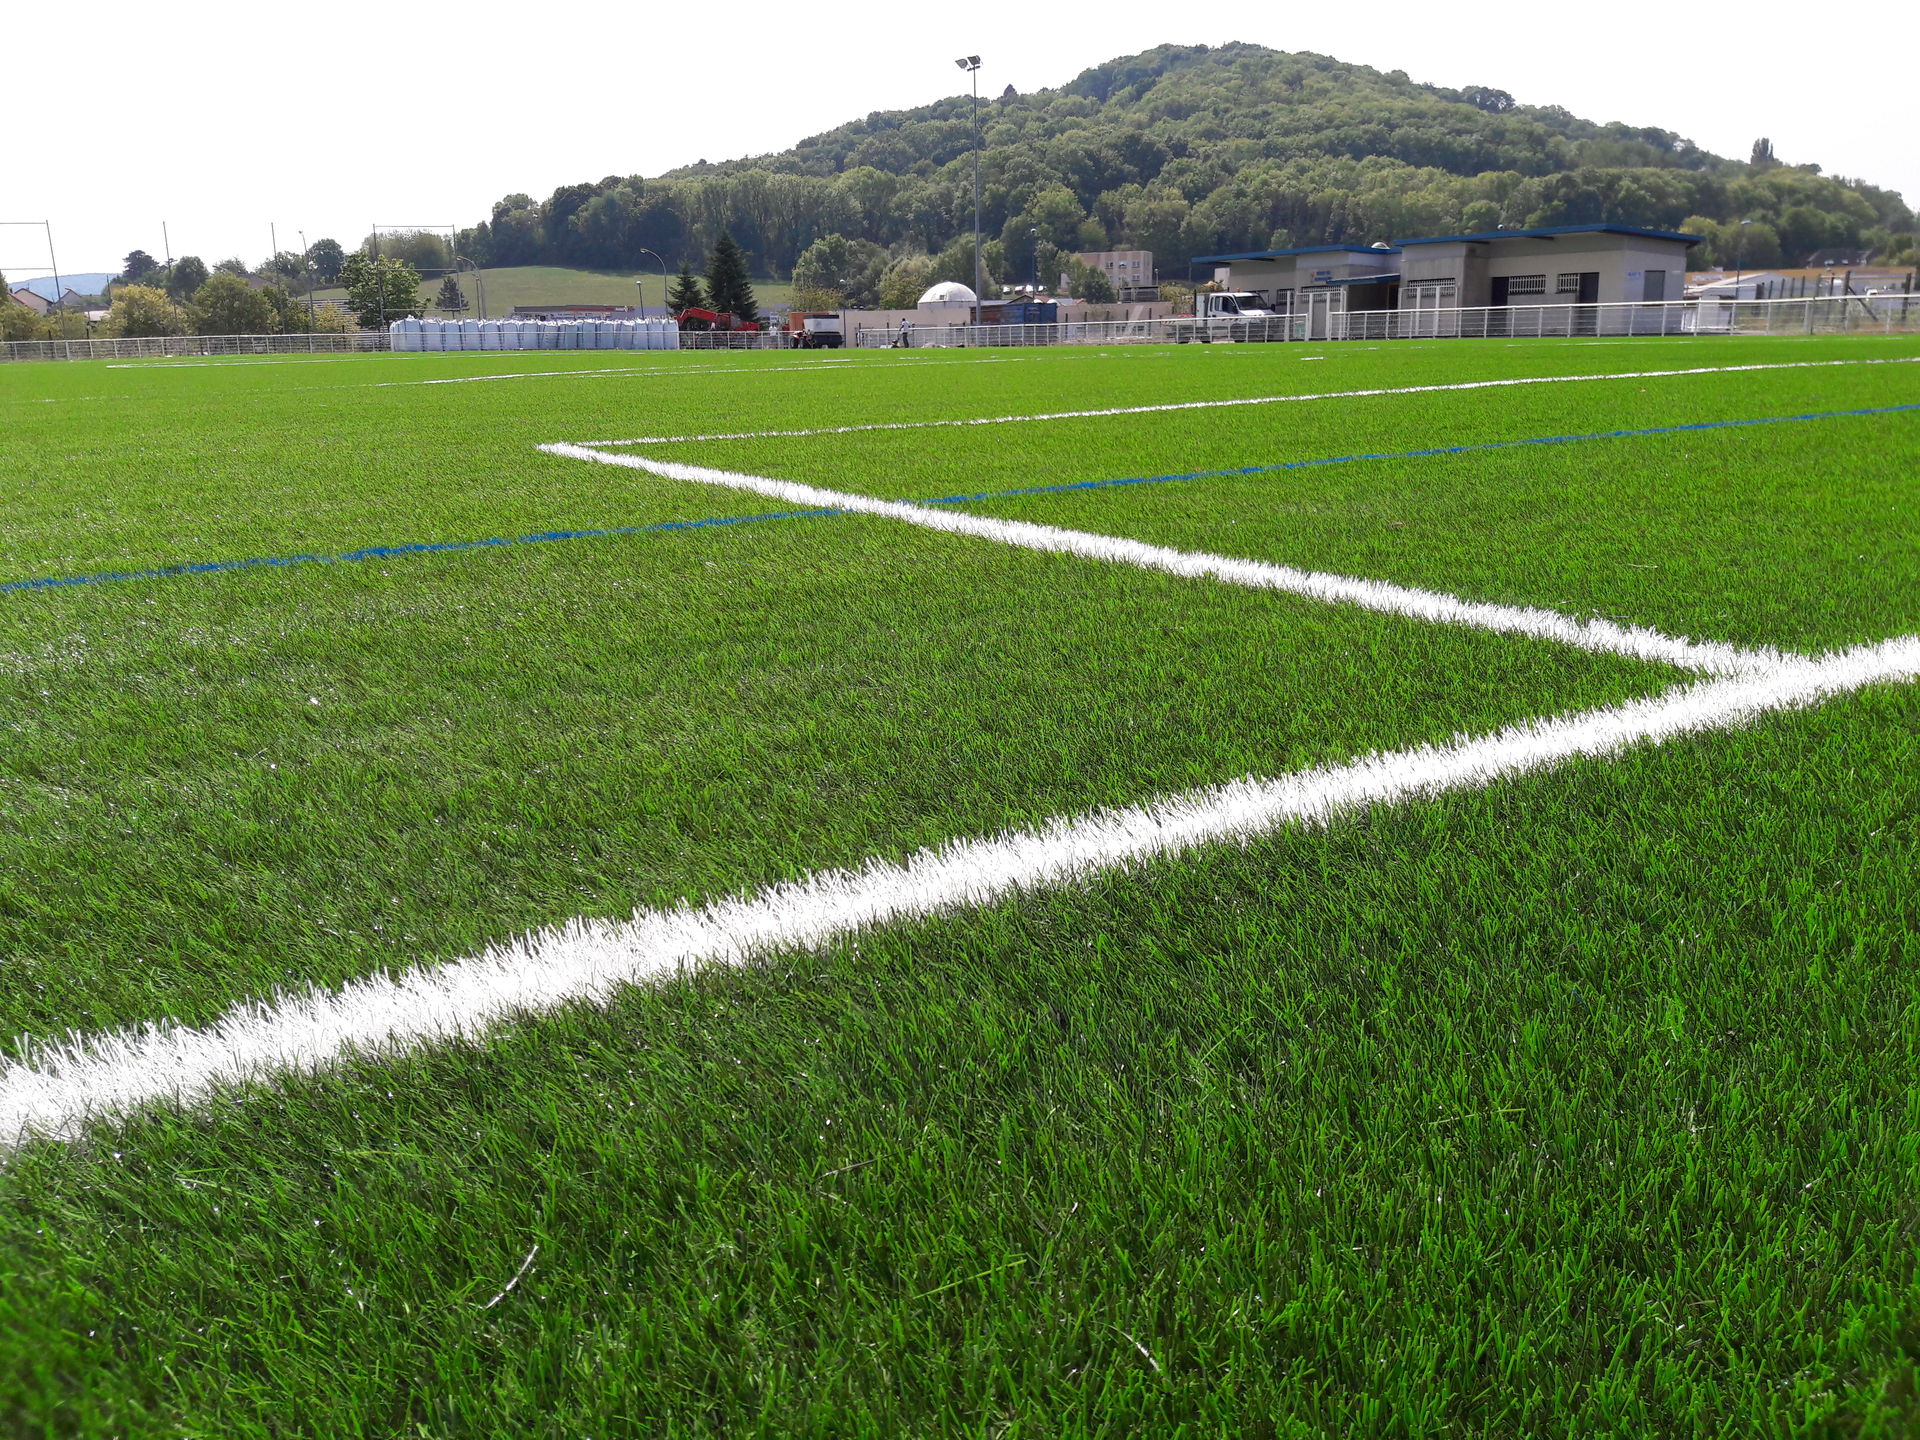 All of Vesoul gets to play on a Lano Sports artificial turf pitch.